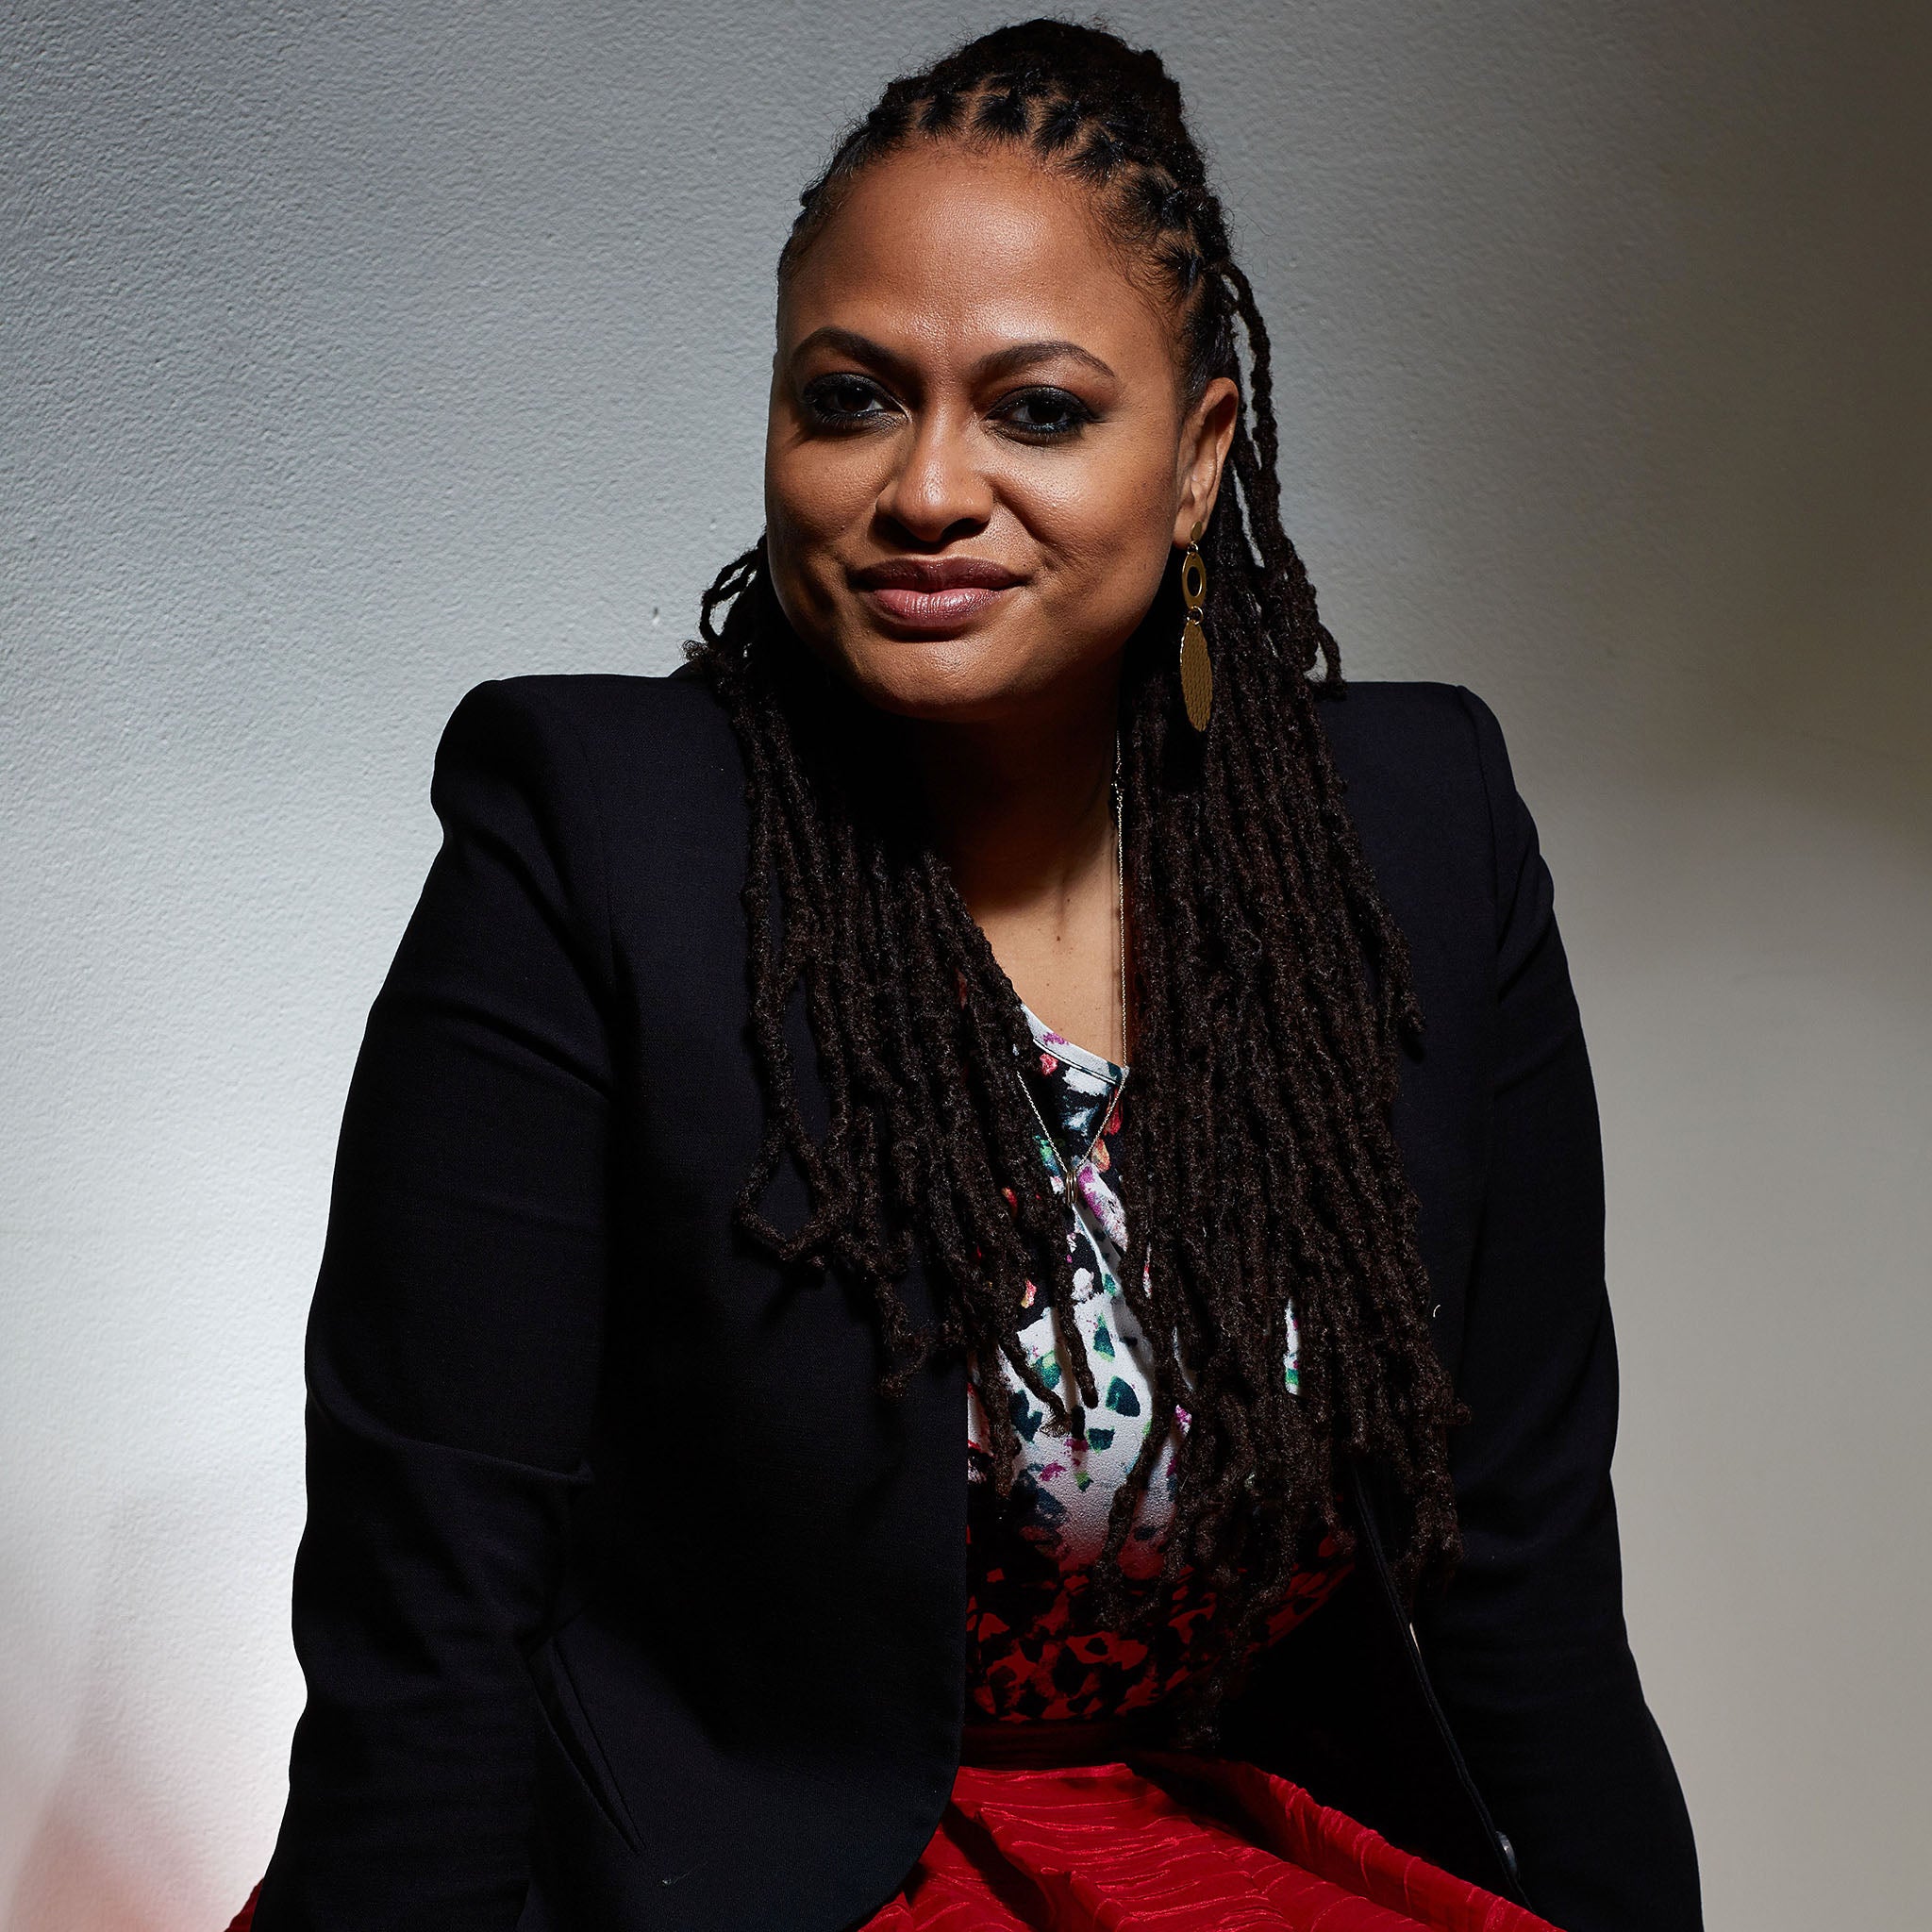 Director Ava DuVernay, whose feature film Selma is nominated in this year's academy awards, photographed at London's Corinthian Hotel.